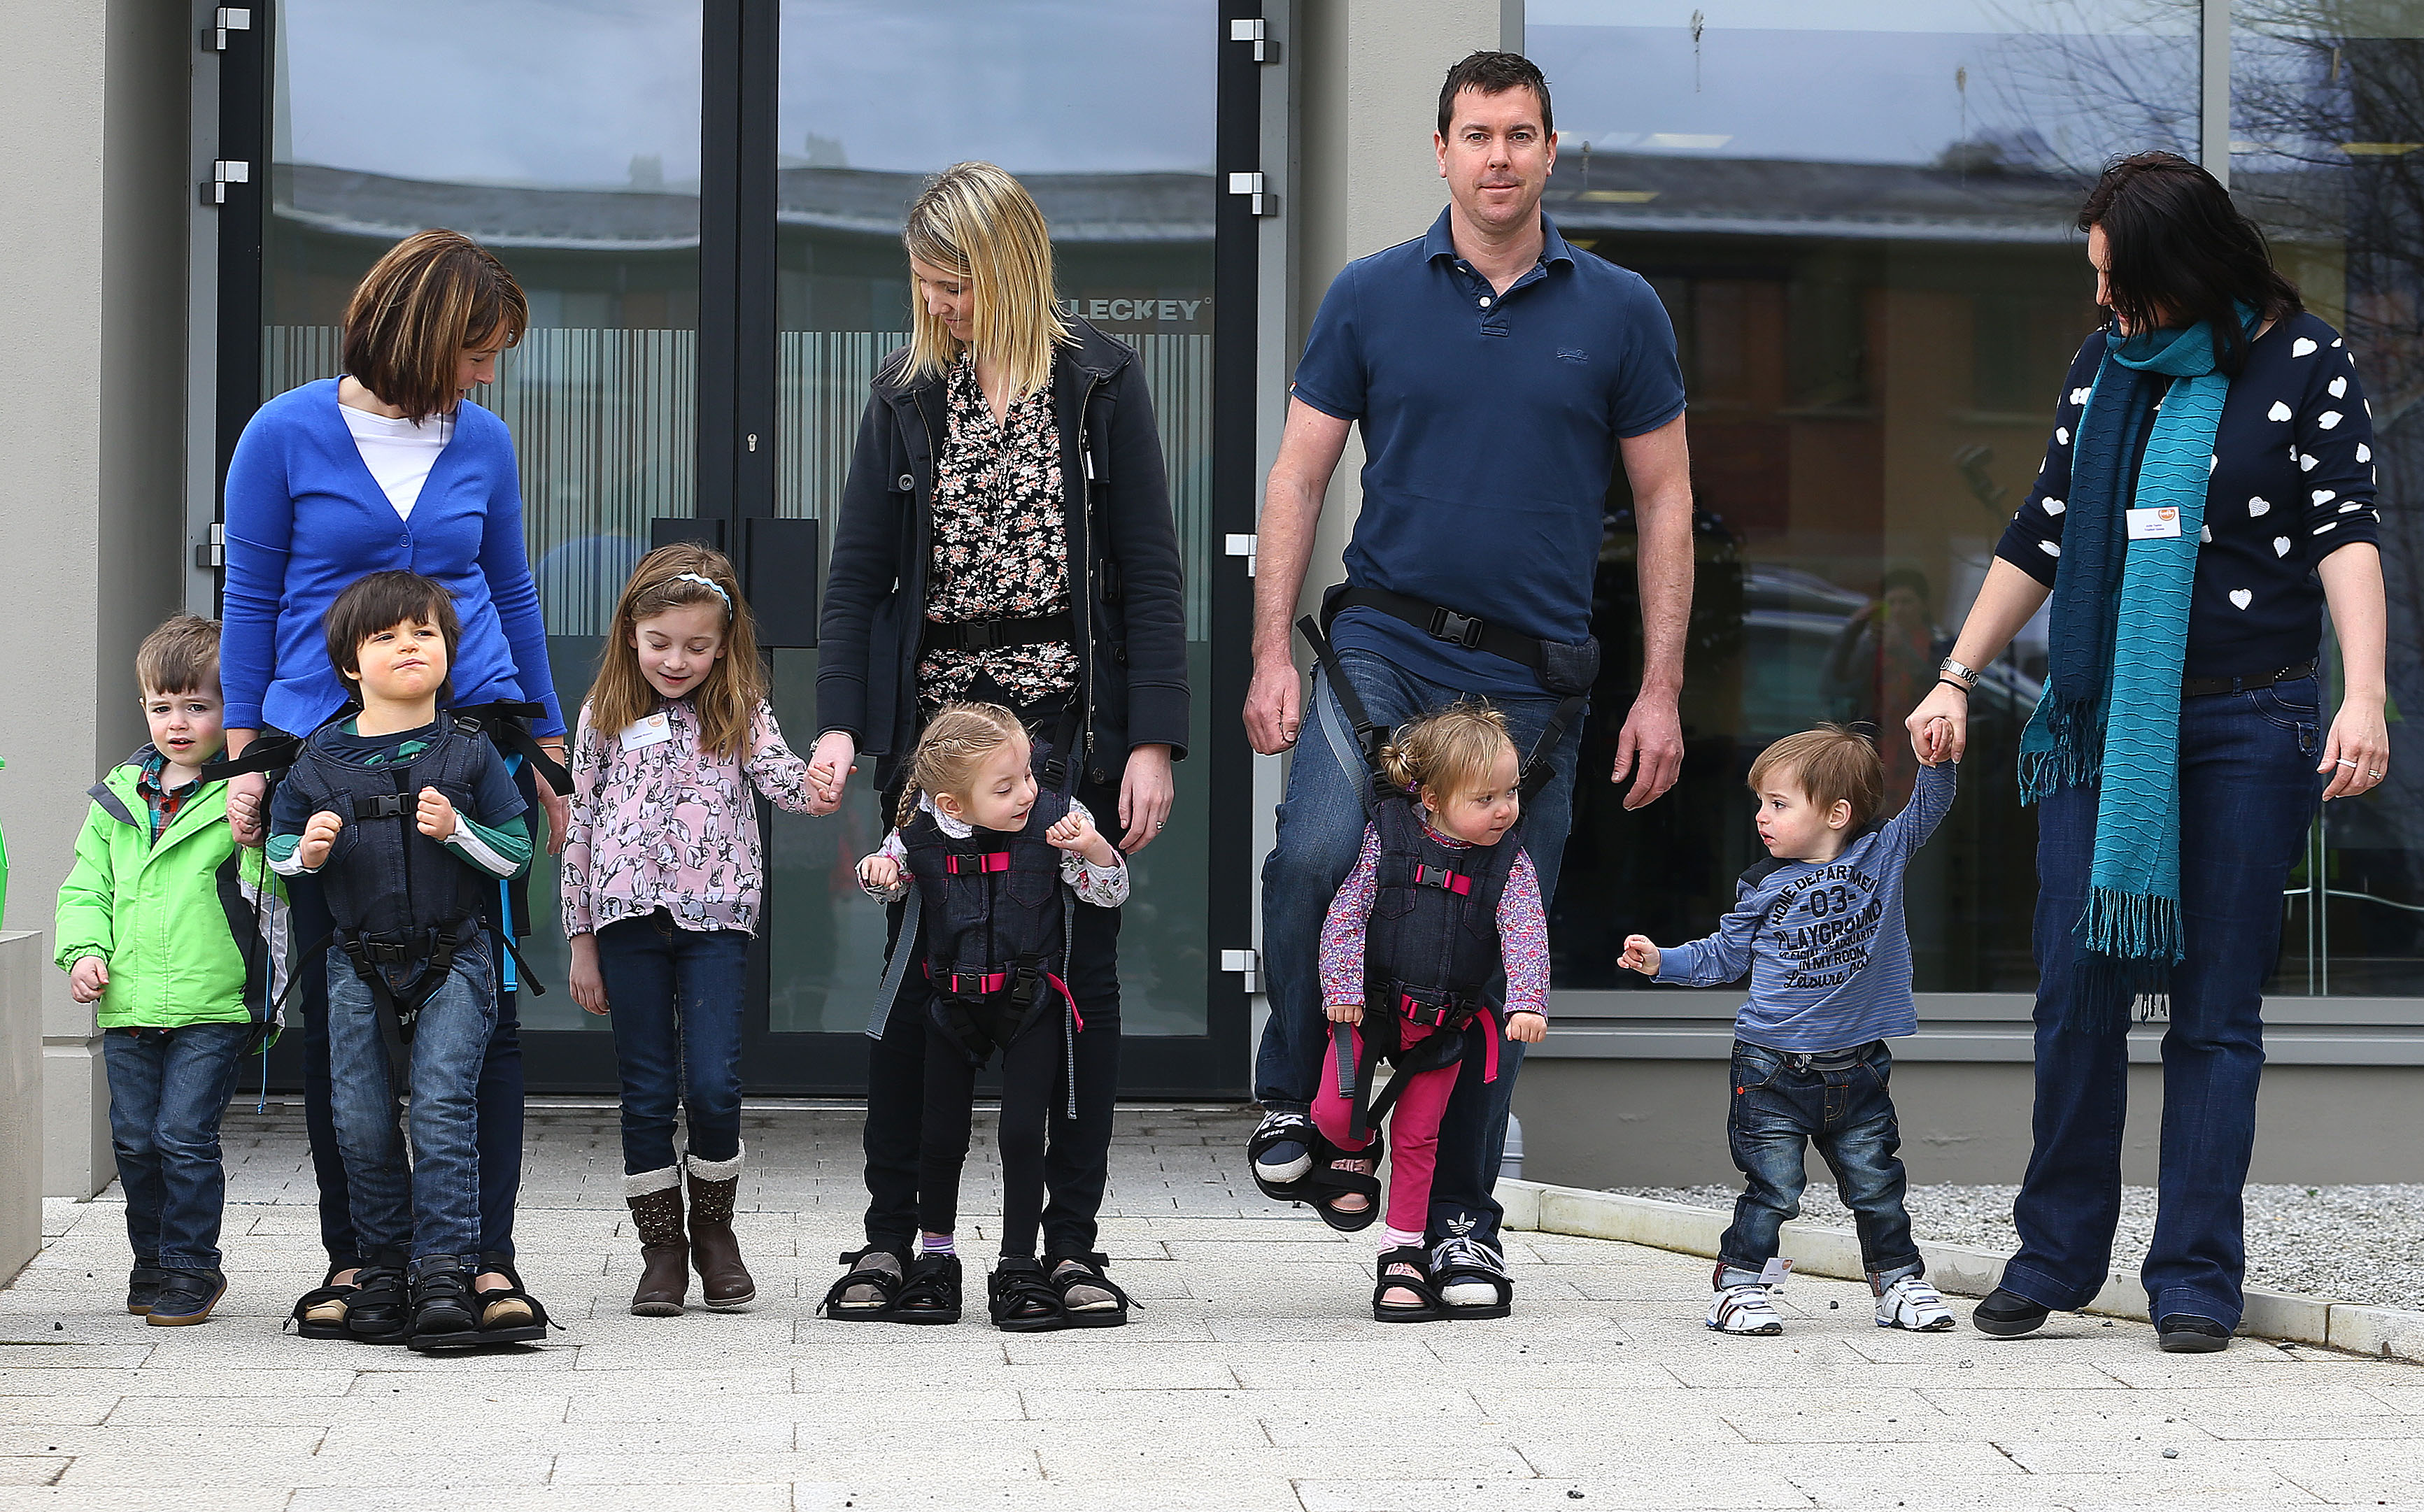 Several adults "wear" their young toddlers in the Firely Upsee baby carriers, but inverted: the child is harnessed to an adult's legs and feet and strapped securely via the shoulders to the adult's waist, allowing simultaneous walking for both caregiver and young user.